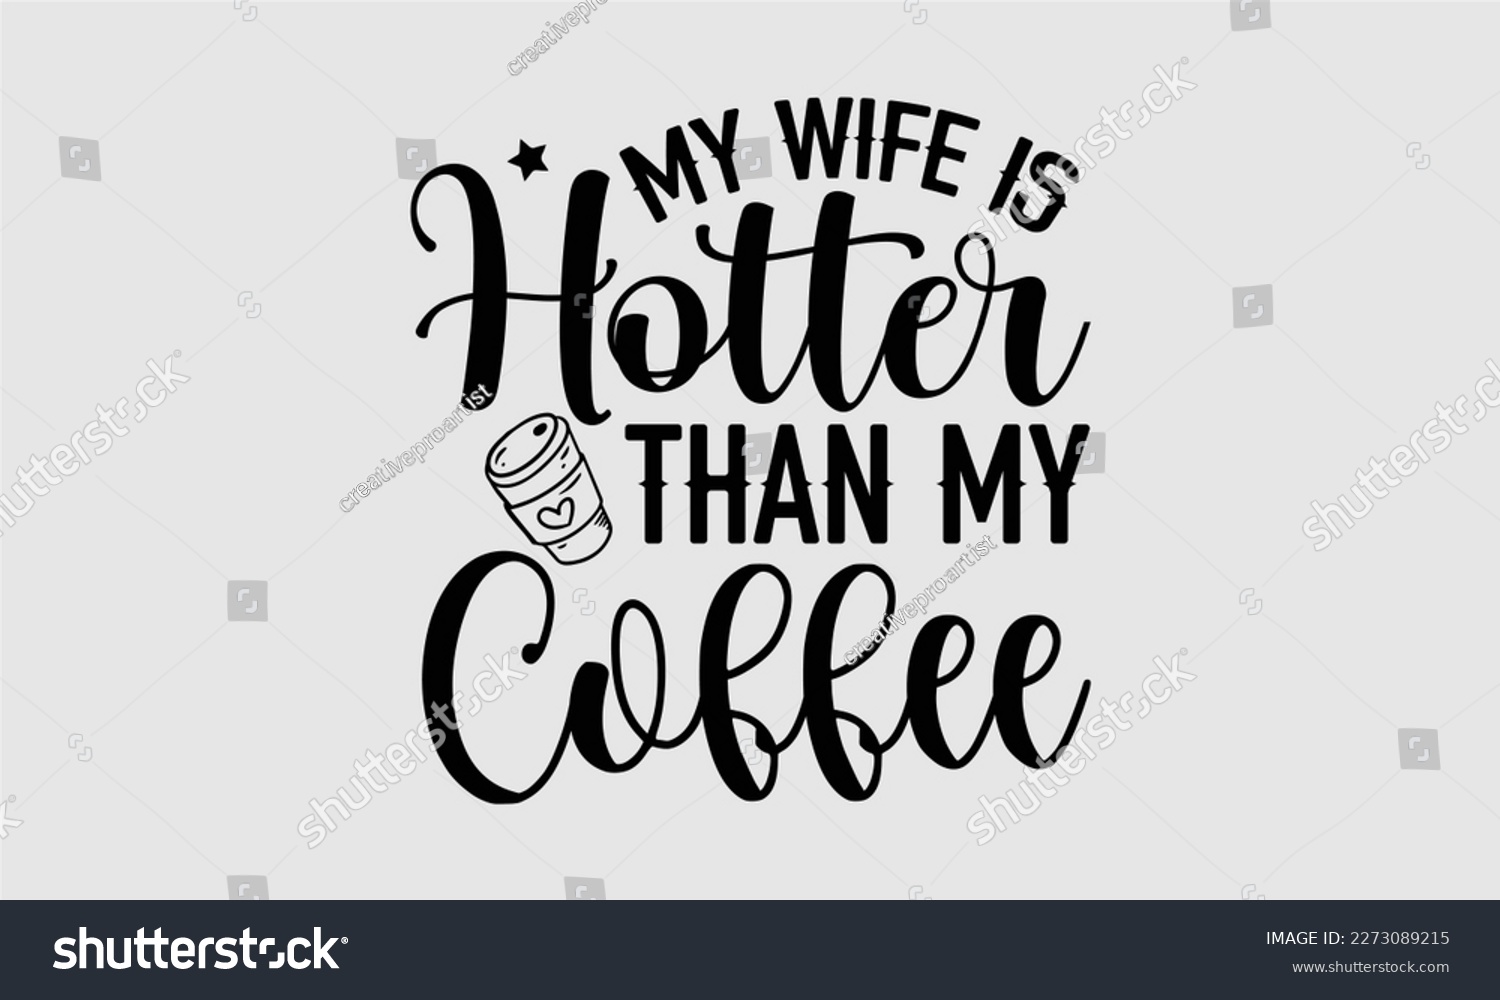 SVG of 
My wife is hotter than my coffee- Wife T- shirt design, Hand drawn vintage illustration with hand-lettering and decoration elements, greeting card template with typography text, eps, svg Files for Cu svg